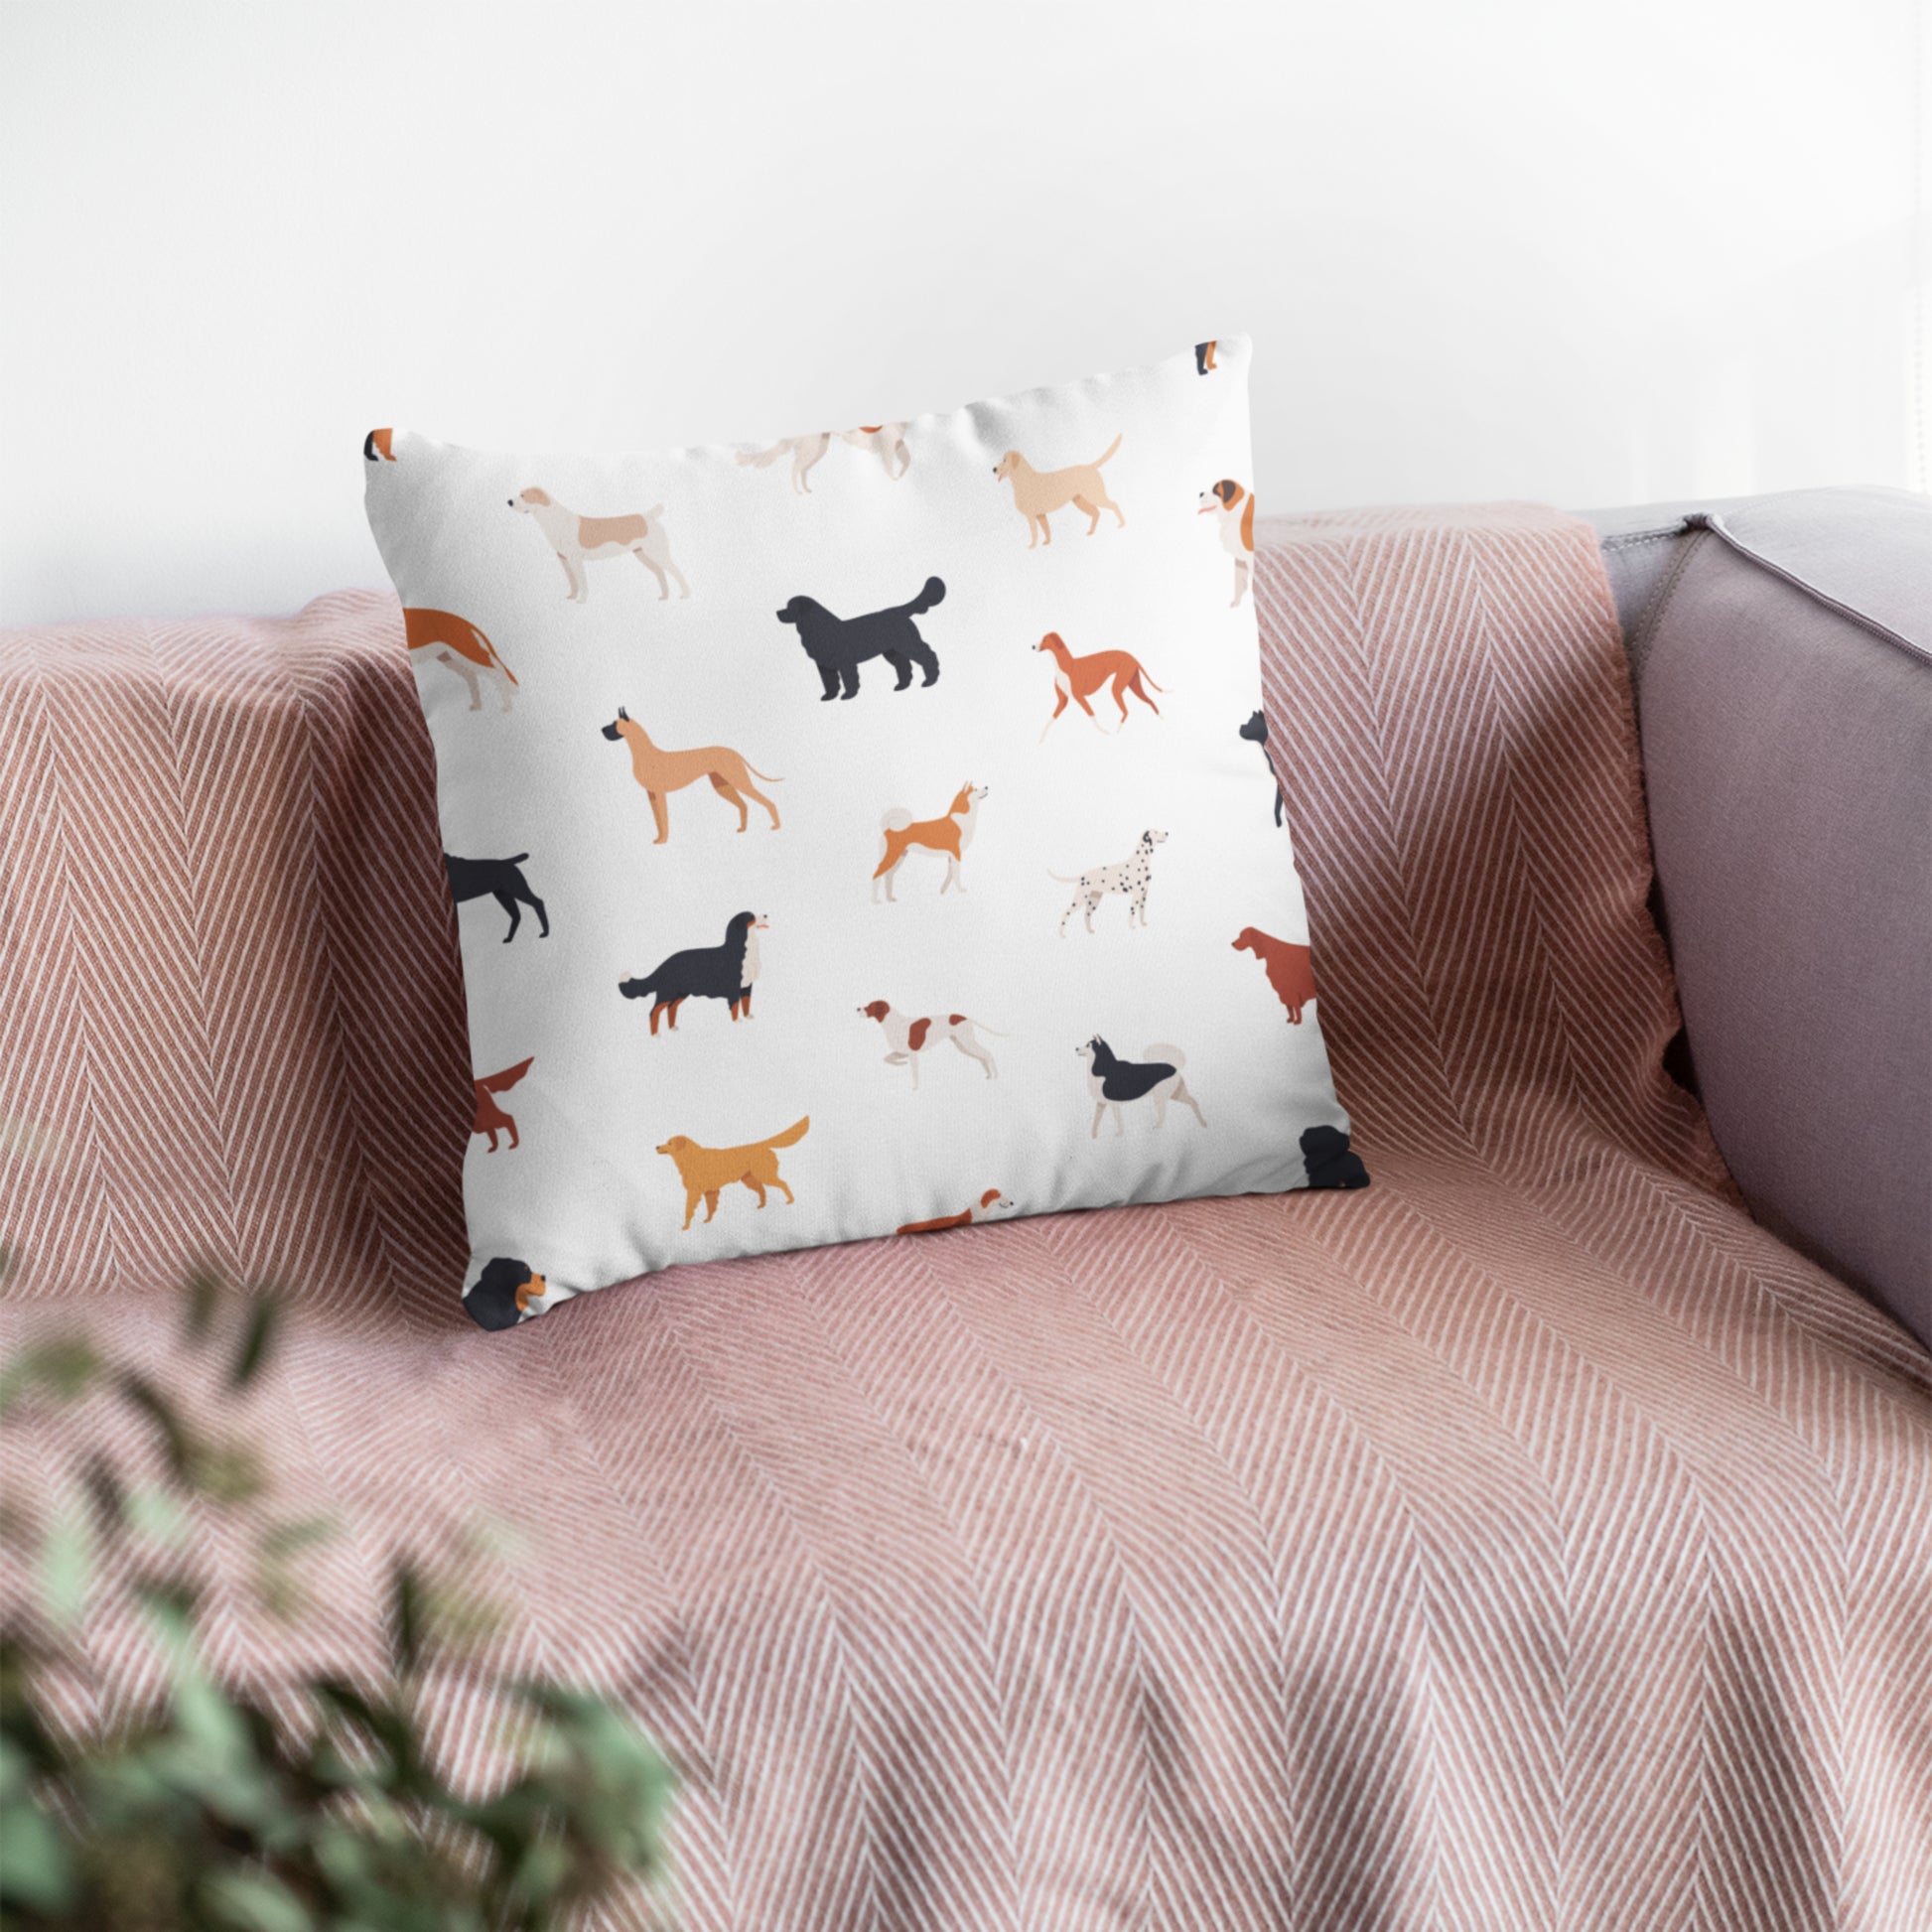 Stylish Printed Throw Pillow with Cute Dogs